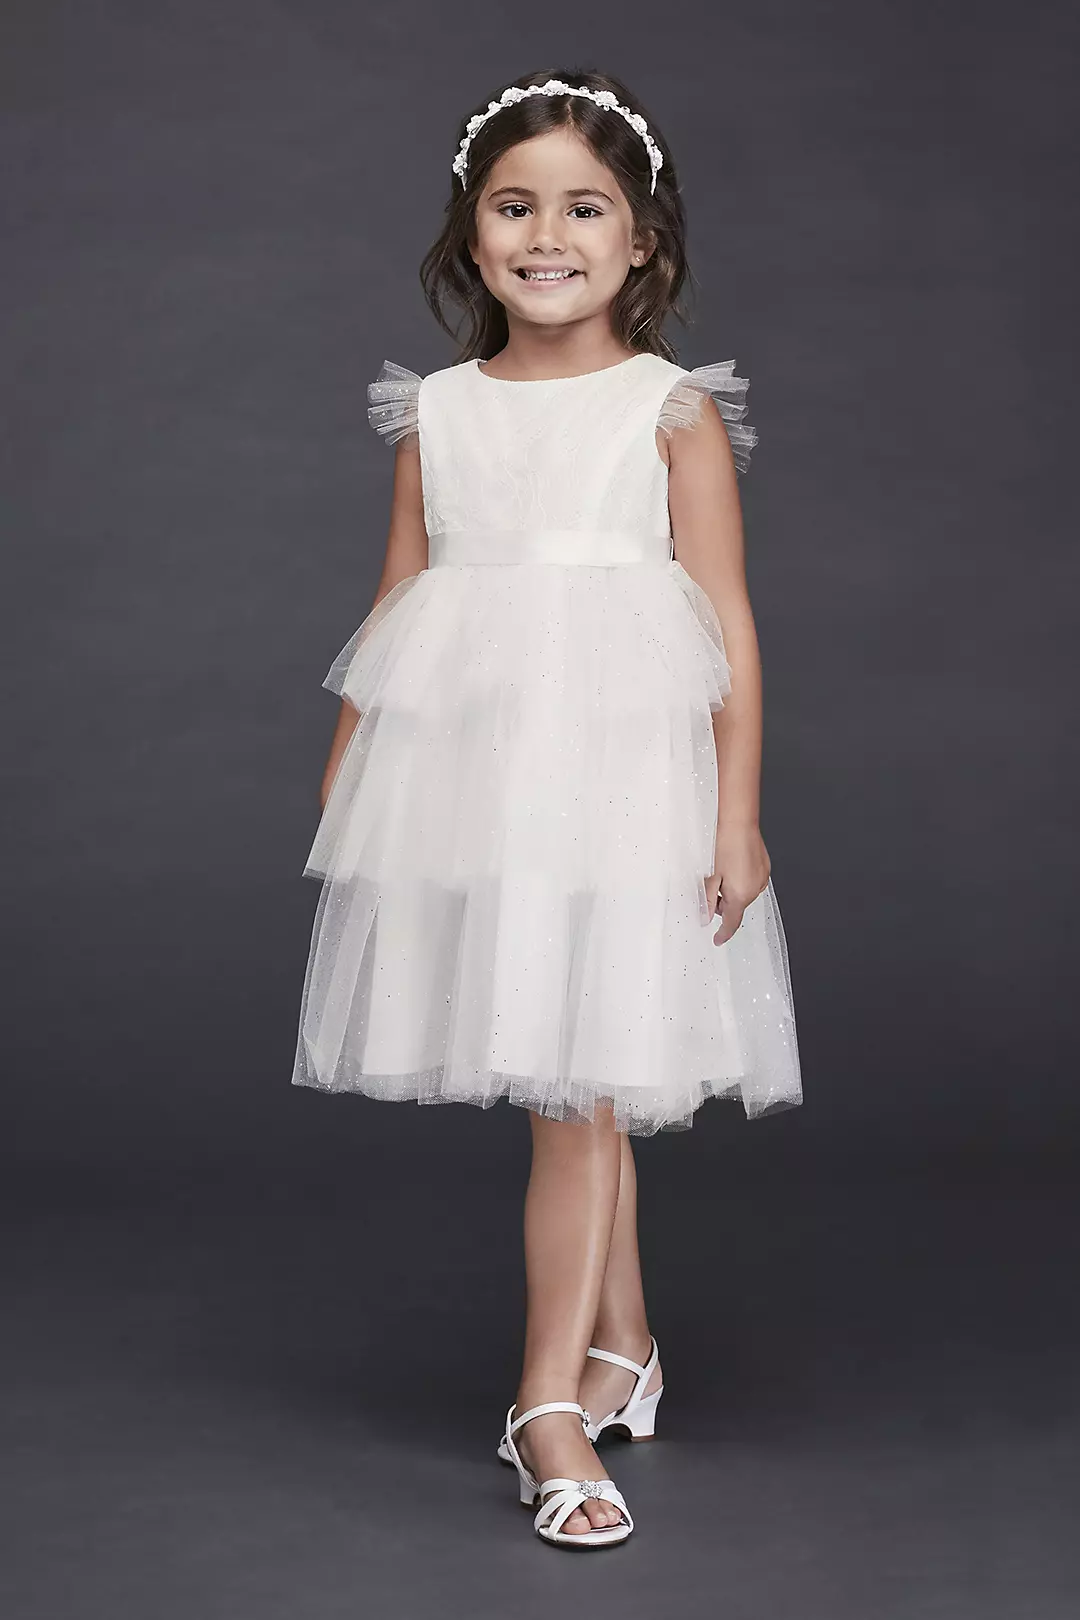 Tiered Sparkle Tulle and Lace Flower Girl Dress Image